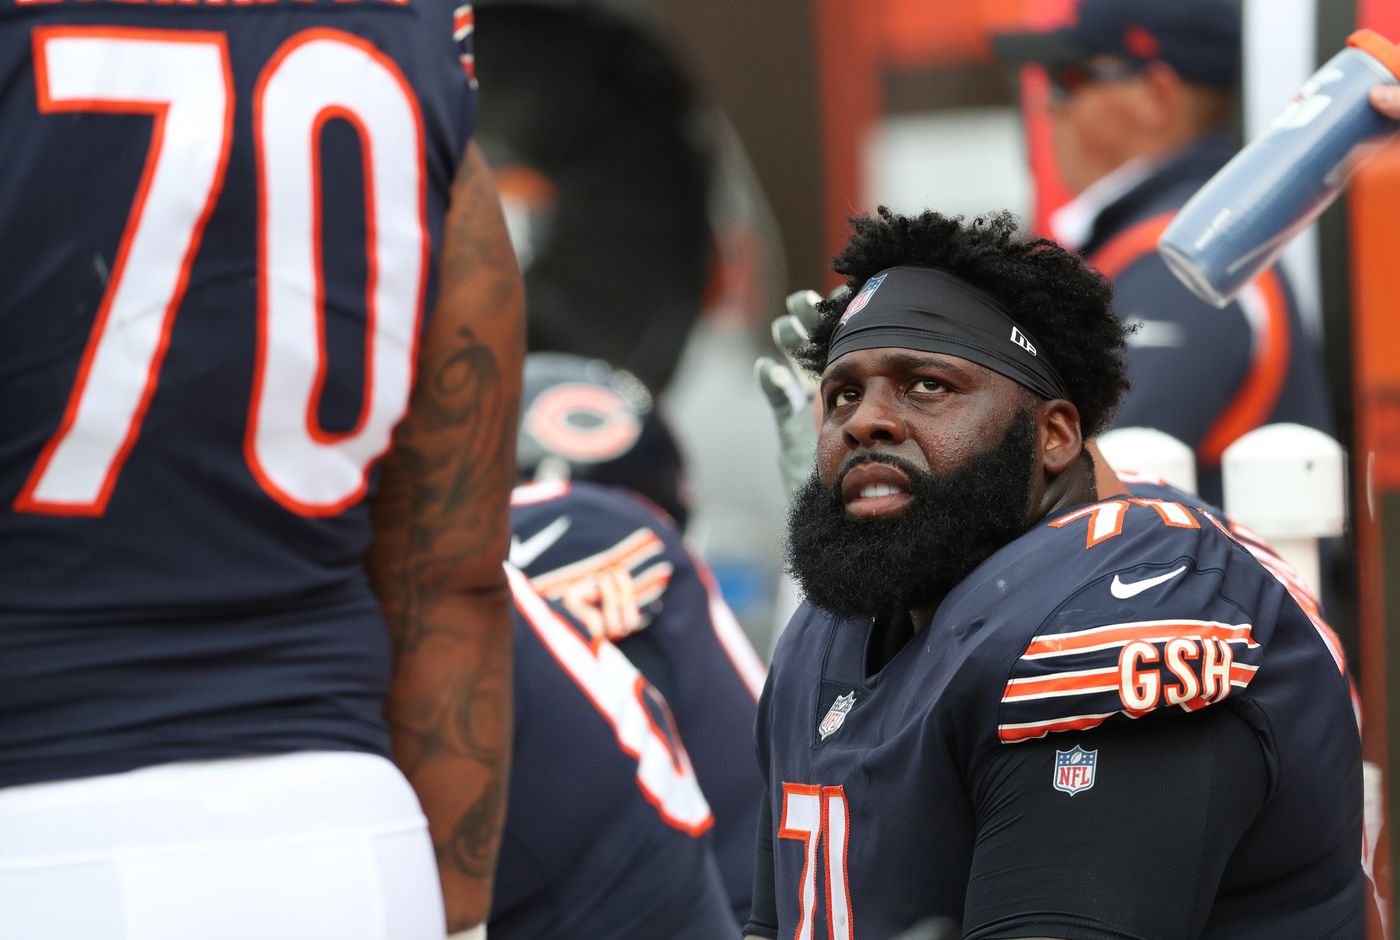 Bears offensive tackle Jason Peters looks at the video board while sitting on the sideline bench in the fourth quarter against the Browns at FirstEnergy Stadium on Sept. 26, 2021.